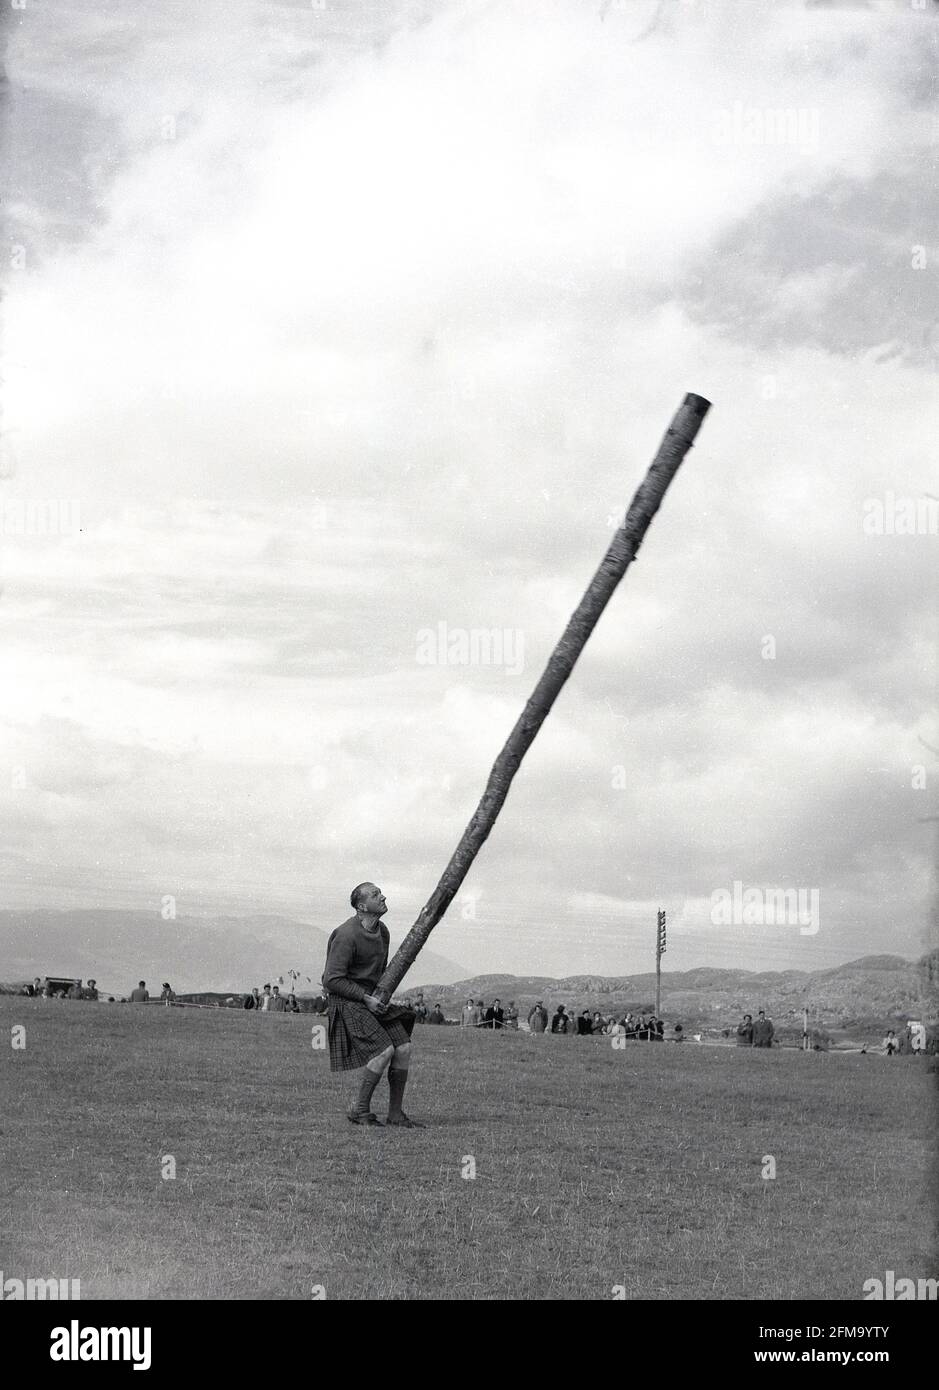 1956, a male competitor at a highland games about to toss the caber, Scotland, A traditional and well-loved athletic event at a Scottish highland games, the 'caber toss' involves a competitor tossing a long, heavy pole so that it turns end over end. Usually made from a Larch tree, and up to 20 feet in length, the caber is stood upright and then lifted up and tossed, not thrown. Caber is the Gaelic word for pole. Devised by Scottish woodsmen, the caber toss was first recorded in 1574, at a military meet  as toss 'ye barr', when clan warriors tested their physical strength in sporting contests. Stock Photo